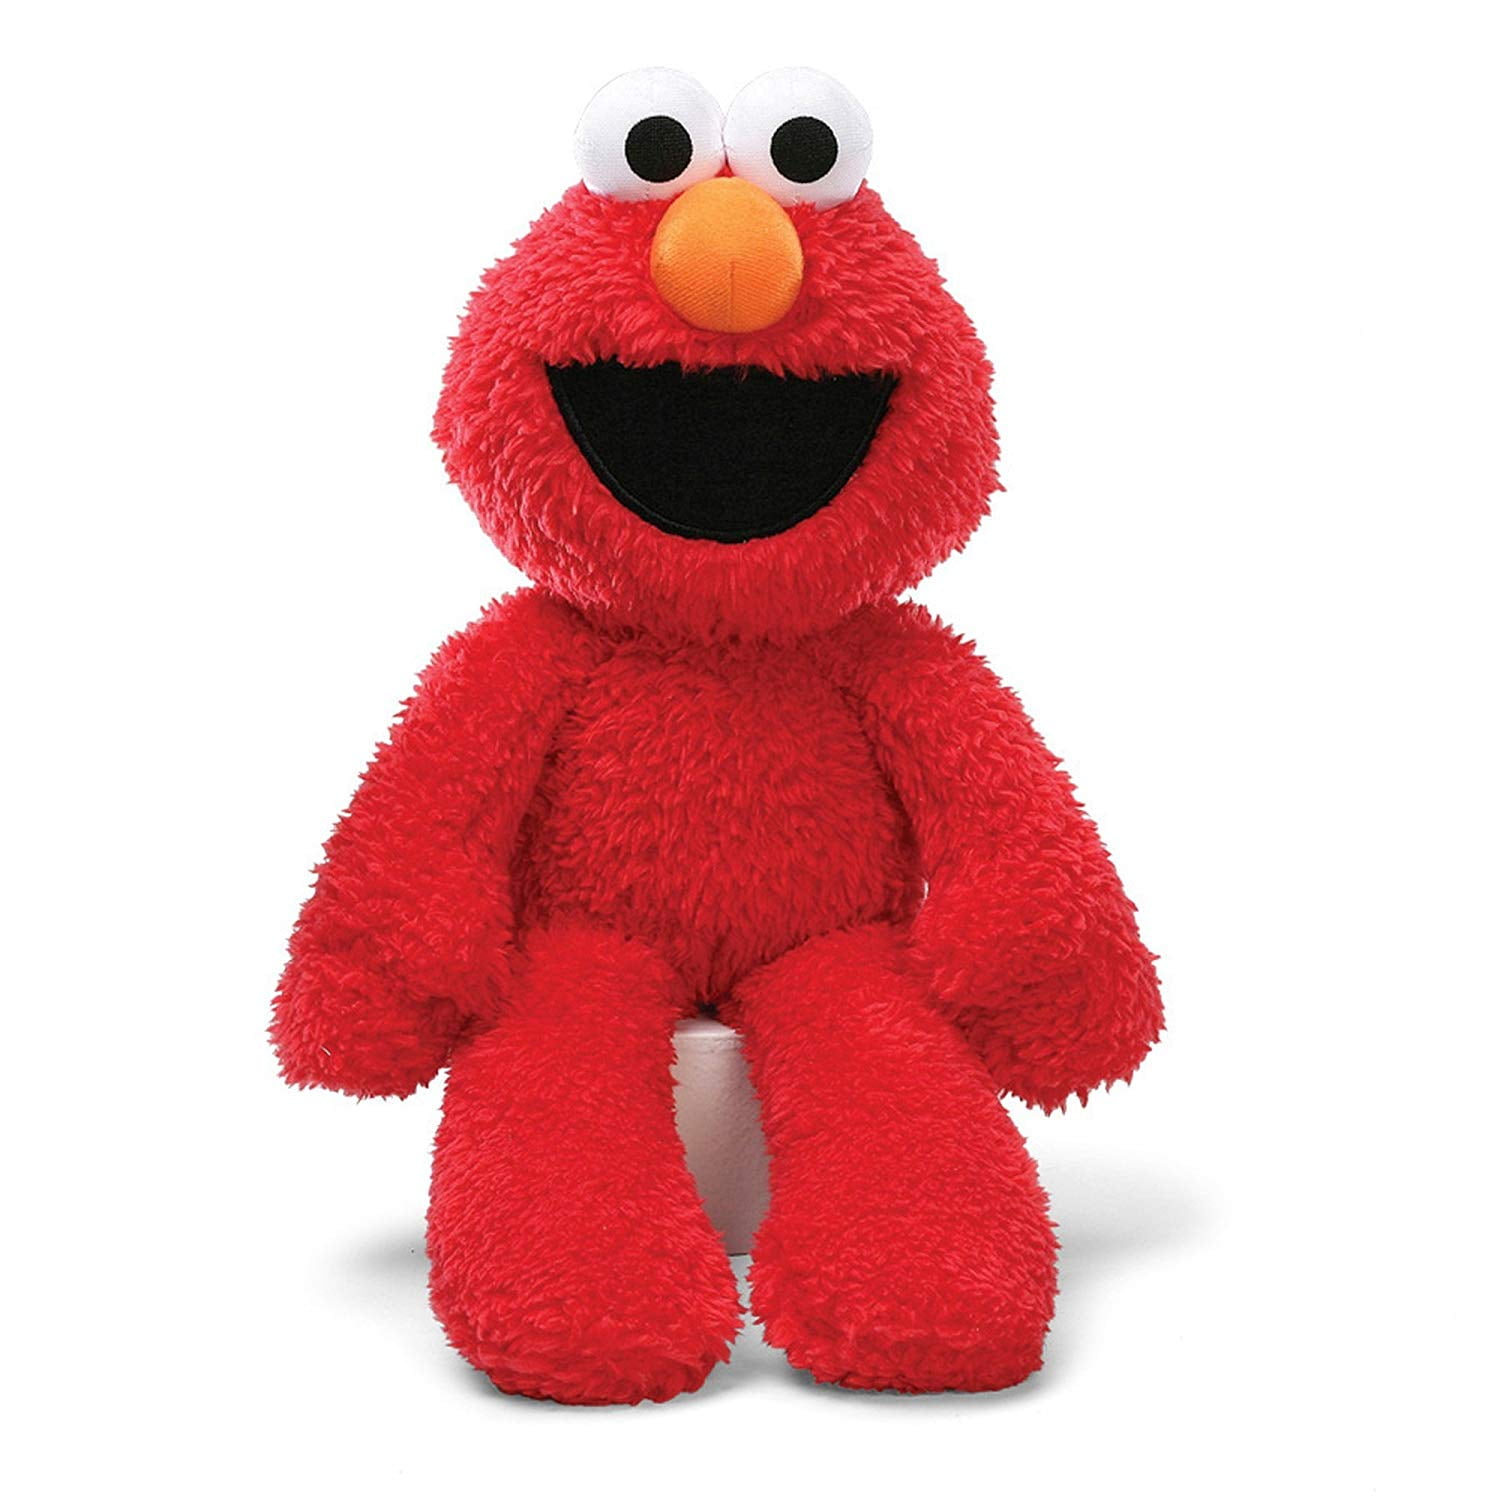 Weighted stuffed animal 3 lbs Elmo washable weighted buddy